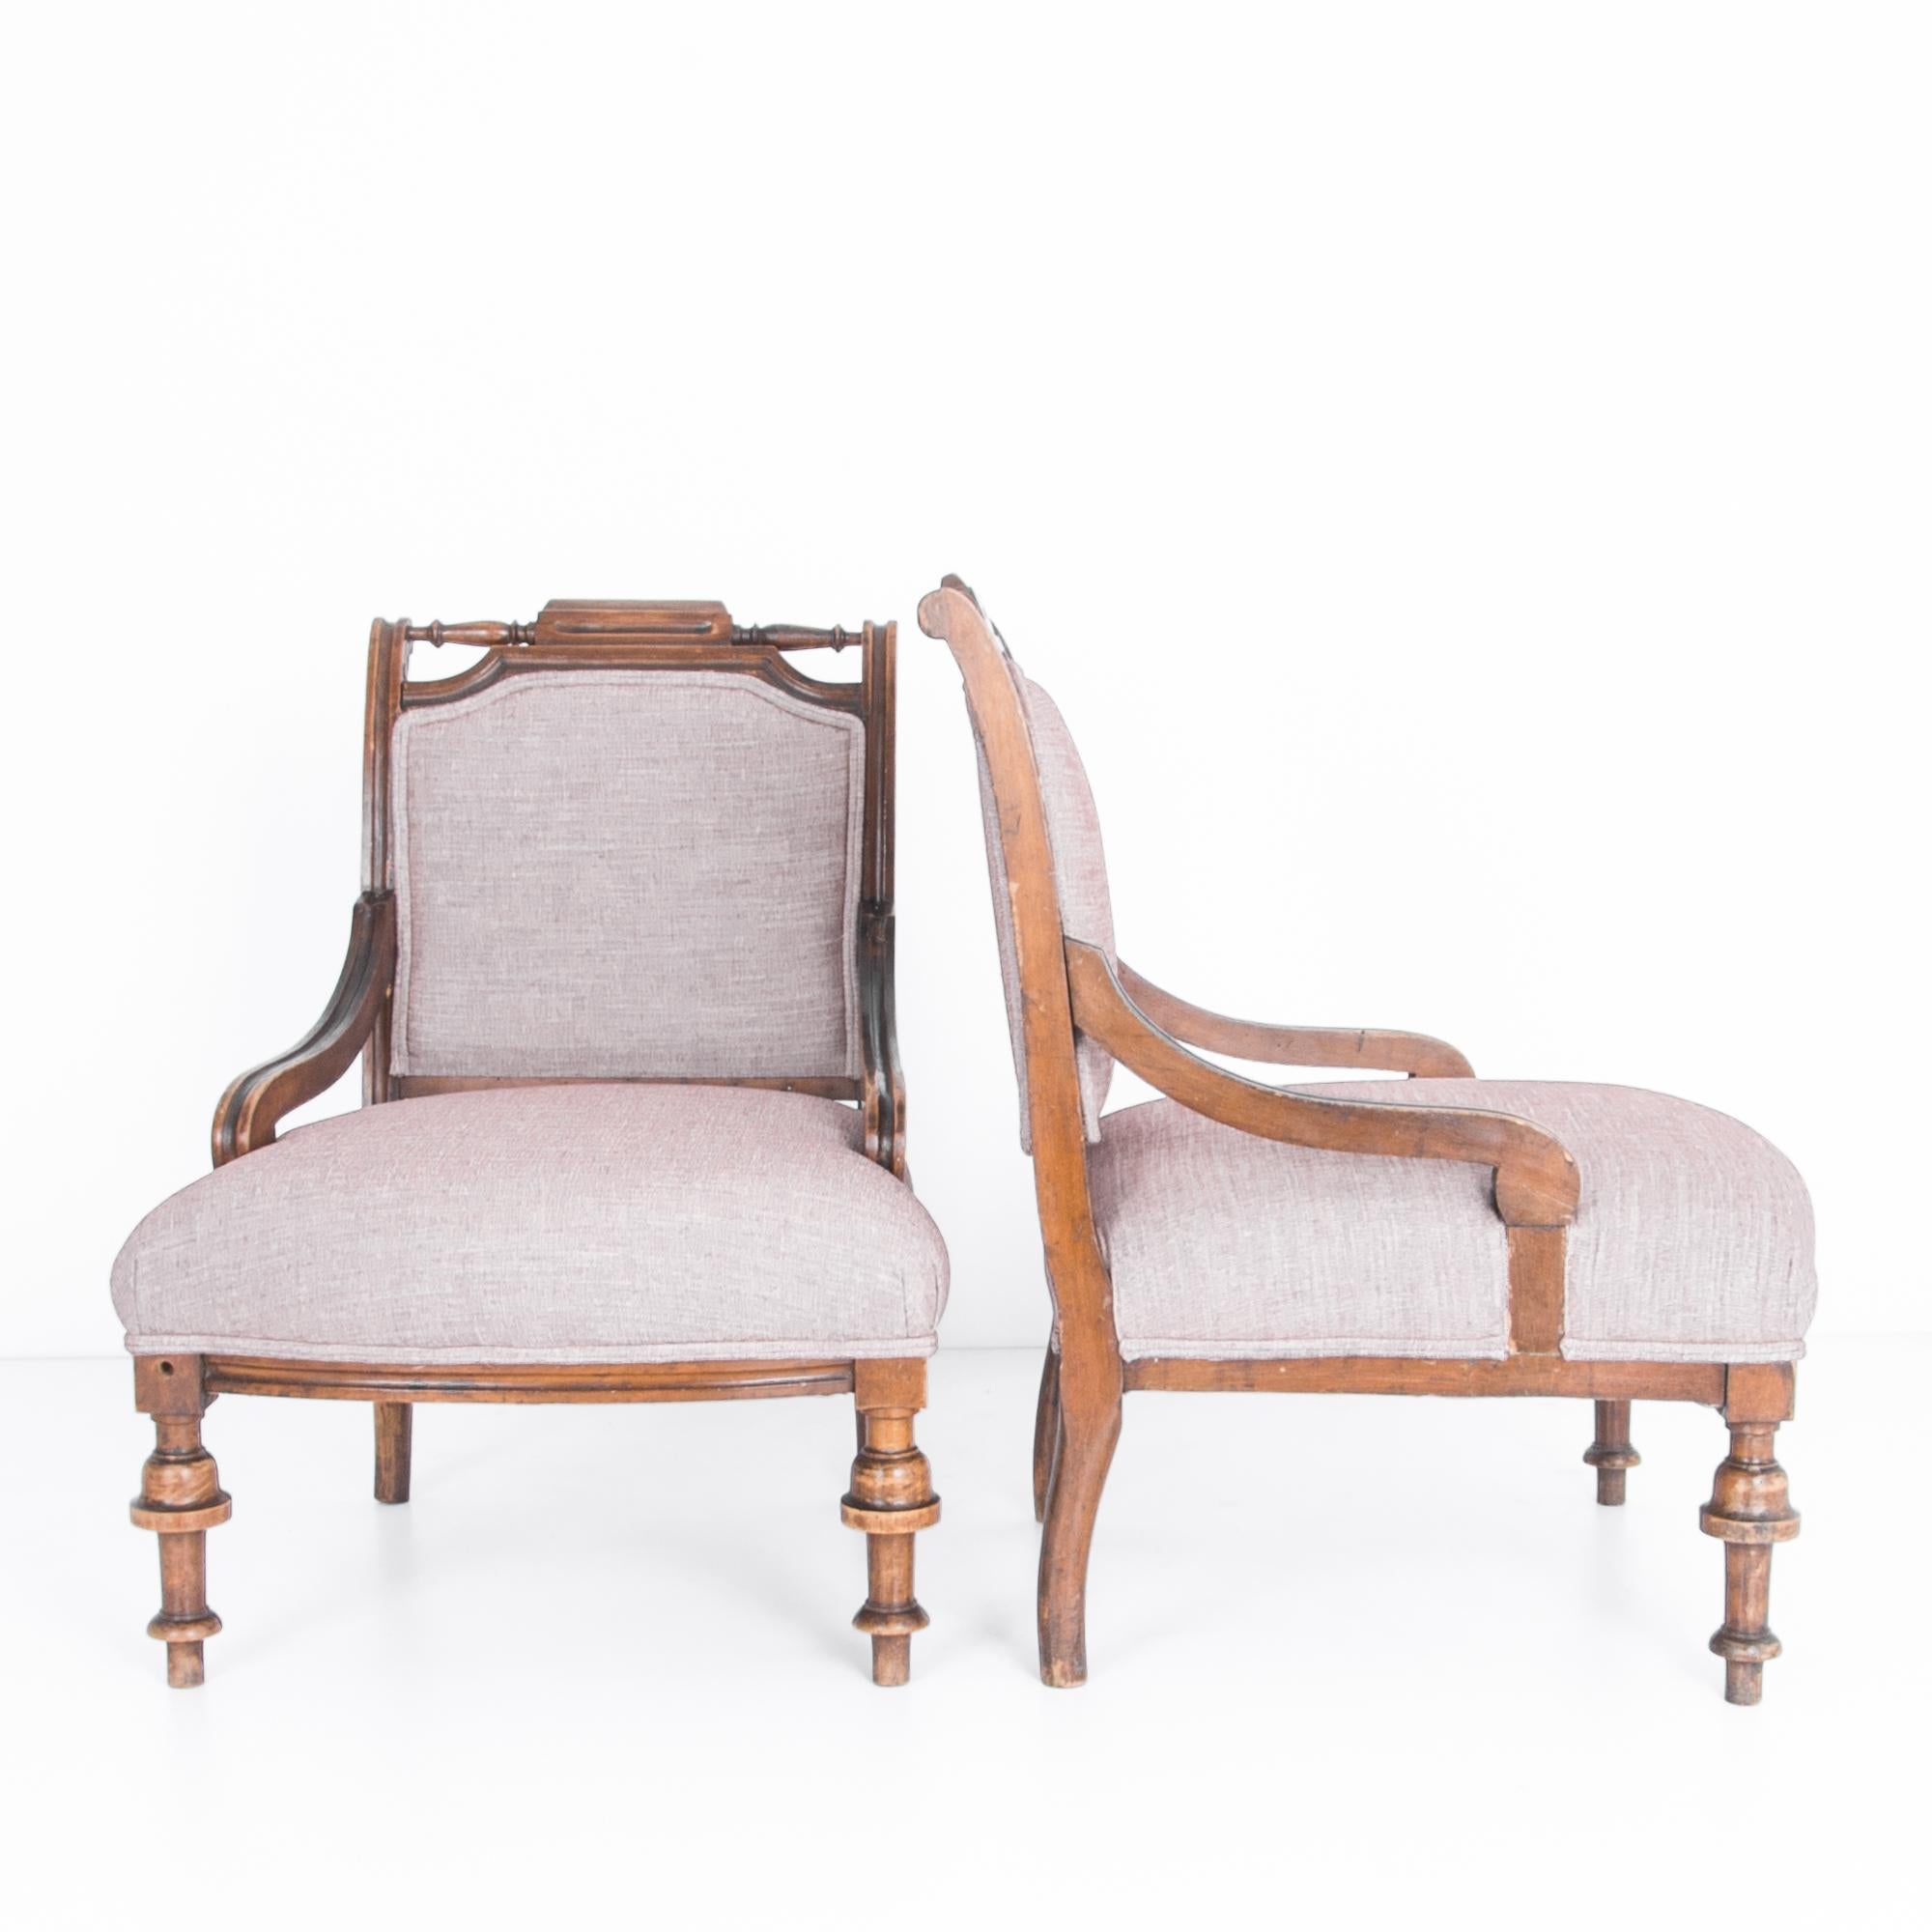 French Provincial Late 19th Century French Upholstered Armchairs, a Pair